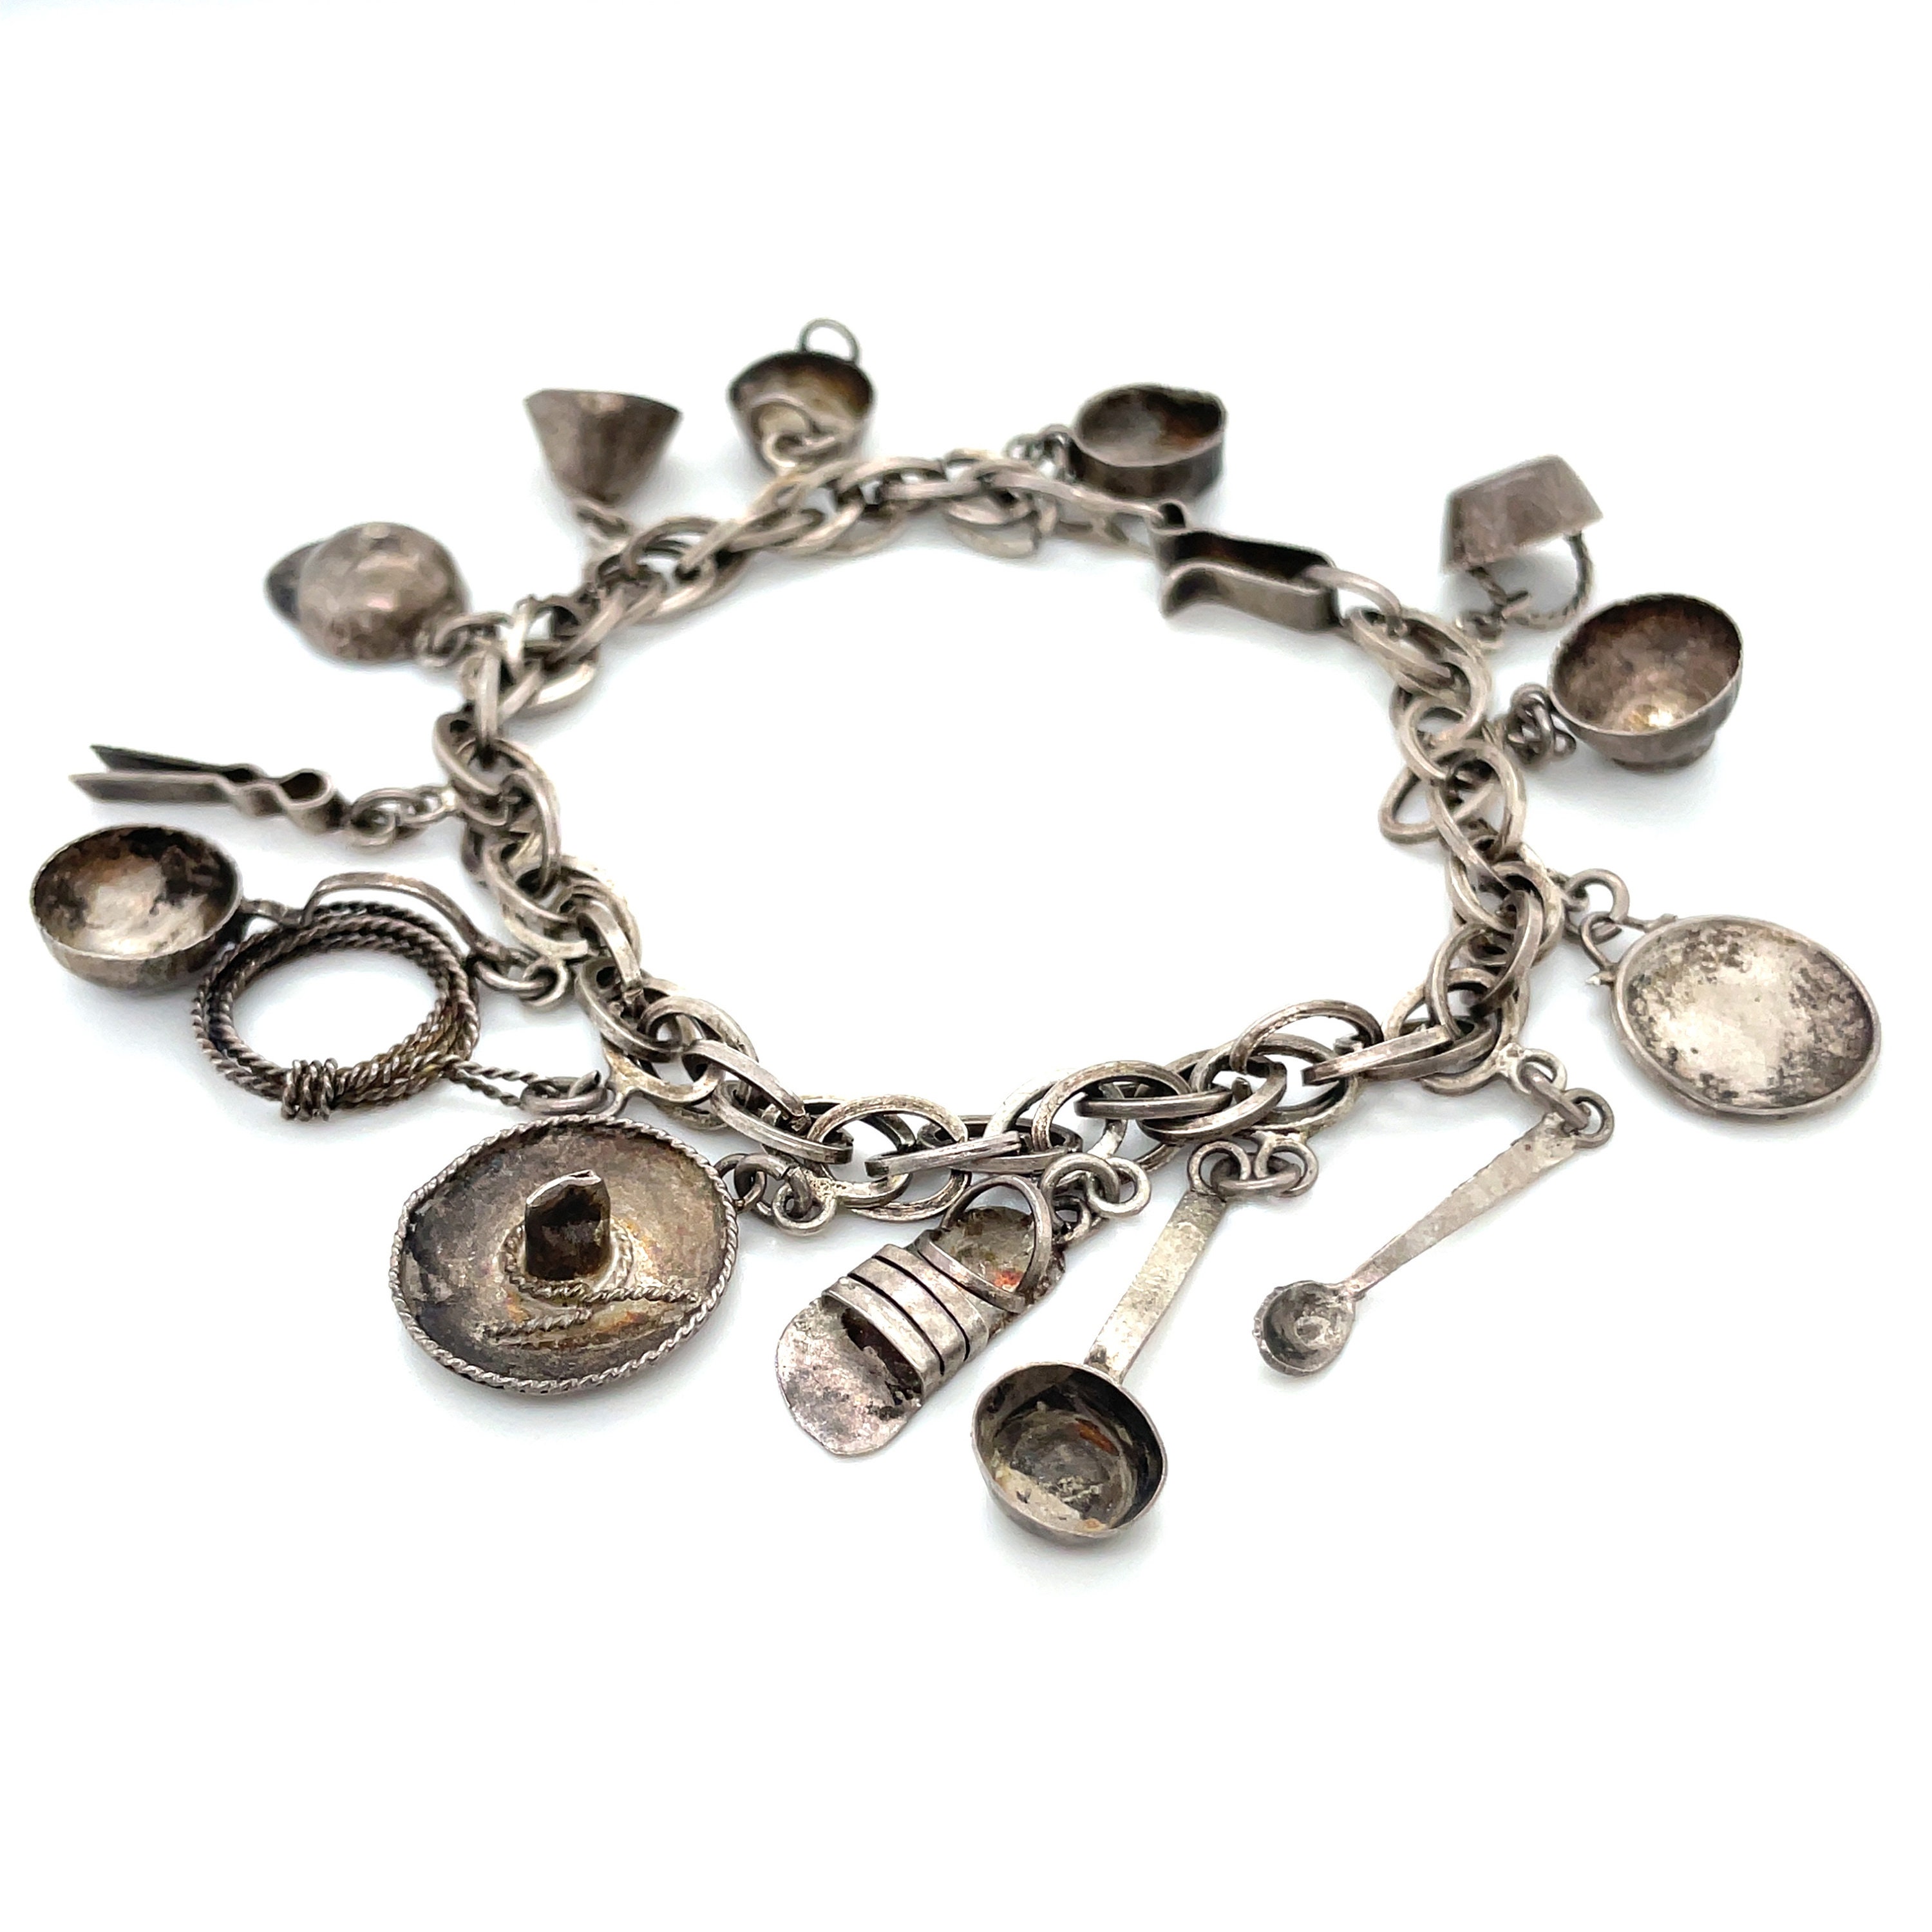 14 Charm Loaded Silver Antique Mexican Charm Bracelet, Mexico Souvenir,  Mexico Themed Charm Bracelet, Old Mexican Sterling Silver Charms 